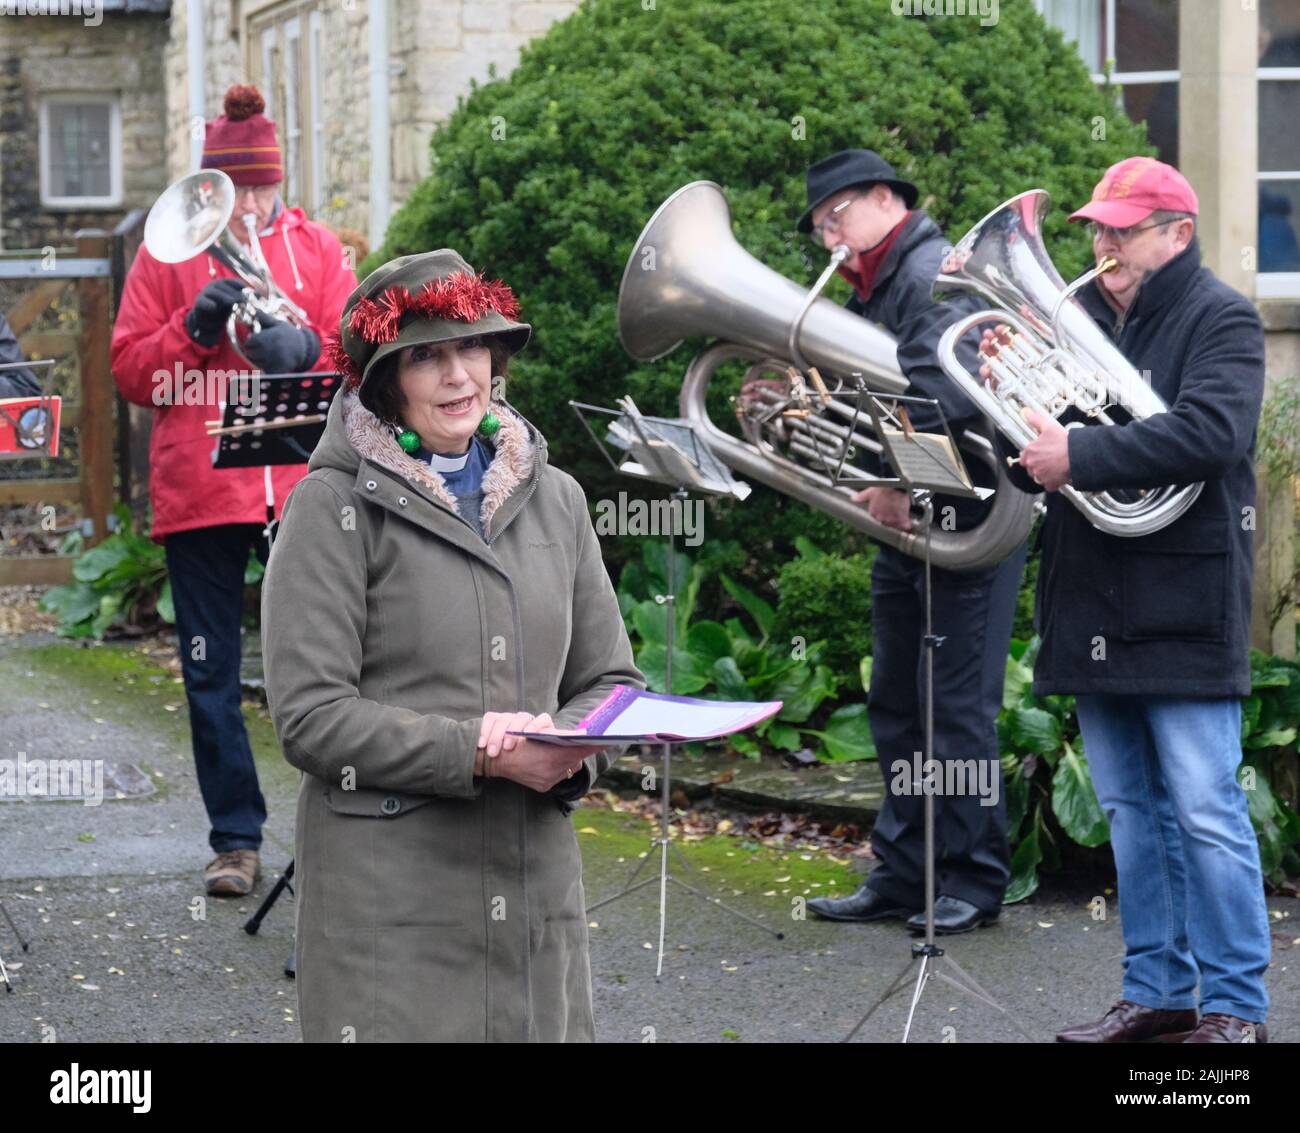 Carols Led by the Vicar. Boxing Day Traditions in Marshfirld Village wiltshire UK Stock Photo